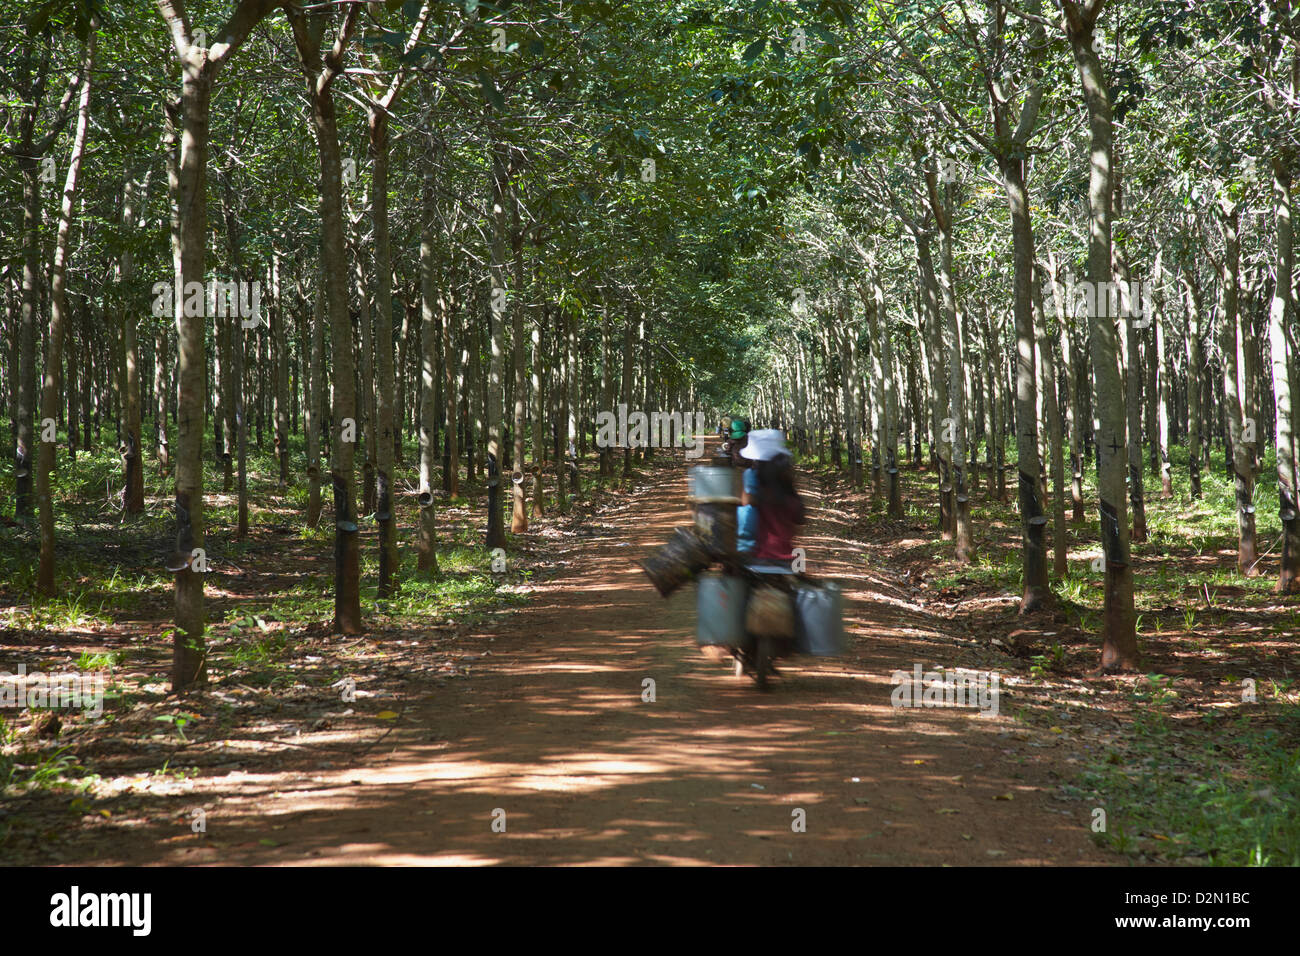 Rubber workers driving through rubber plantation, Kampong Cham, Cambodia, Indochina, Southeast Asia, Asia Stock Photo